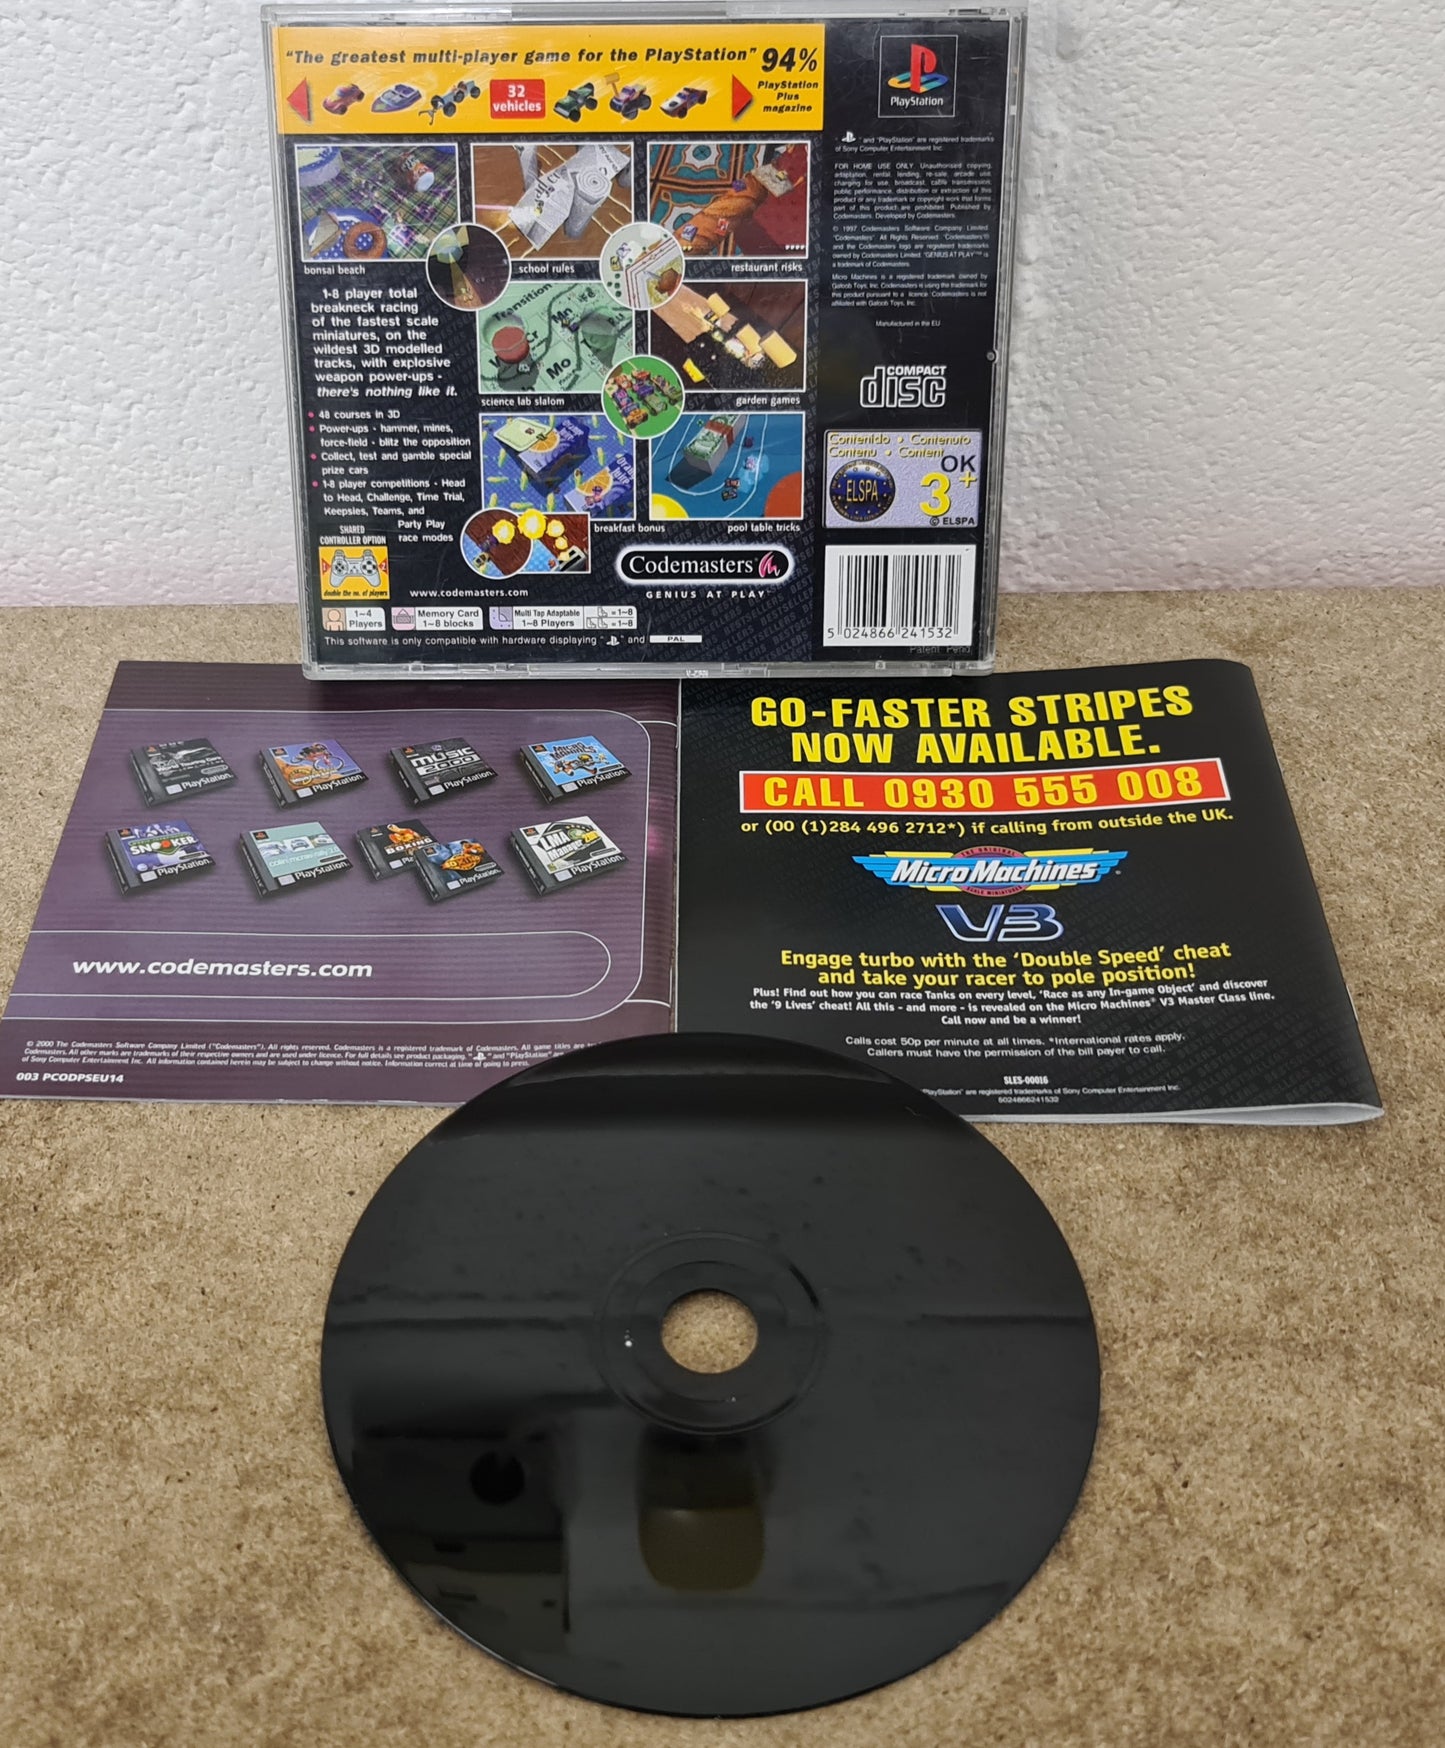 Micro Machines V3 Value Series Sony Playstation 1 (PS1) Game